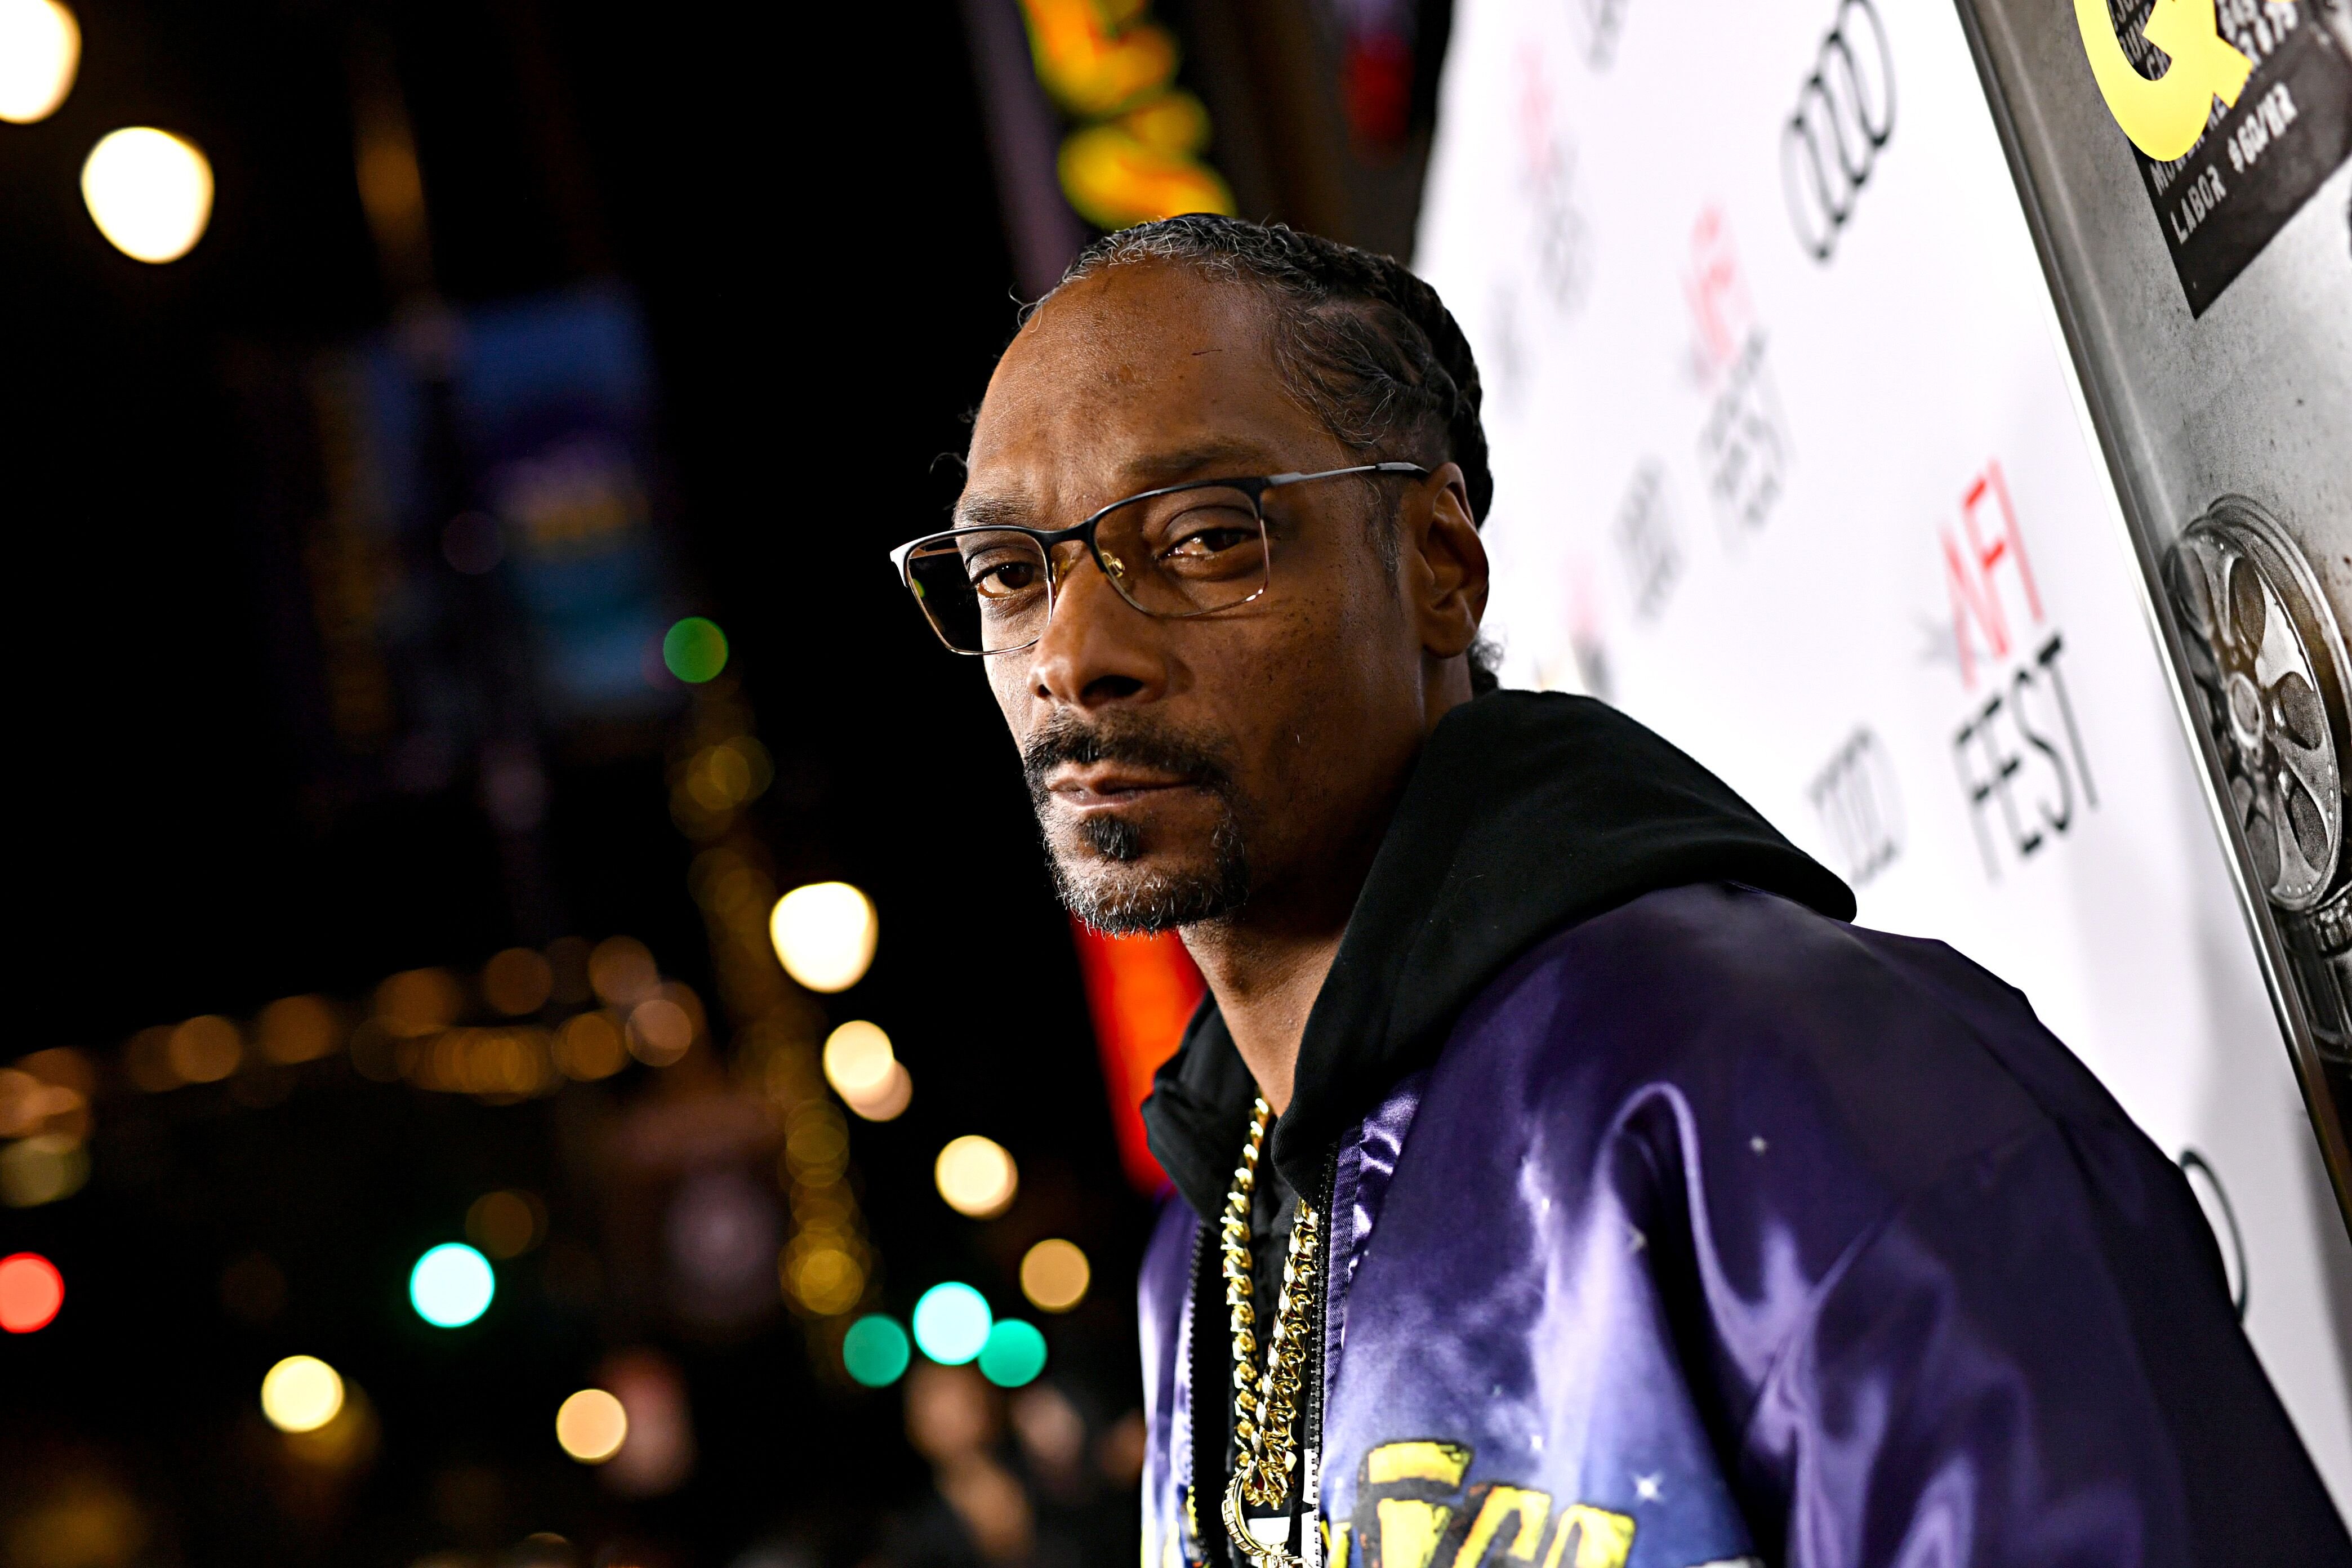 Snoop Dogg at the after party for the premiere of "Queen & Slim" at AFI FEST 2019, Hollywood | Photo: Getty Images